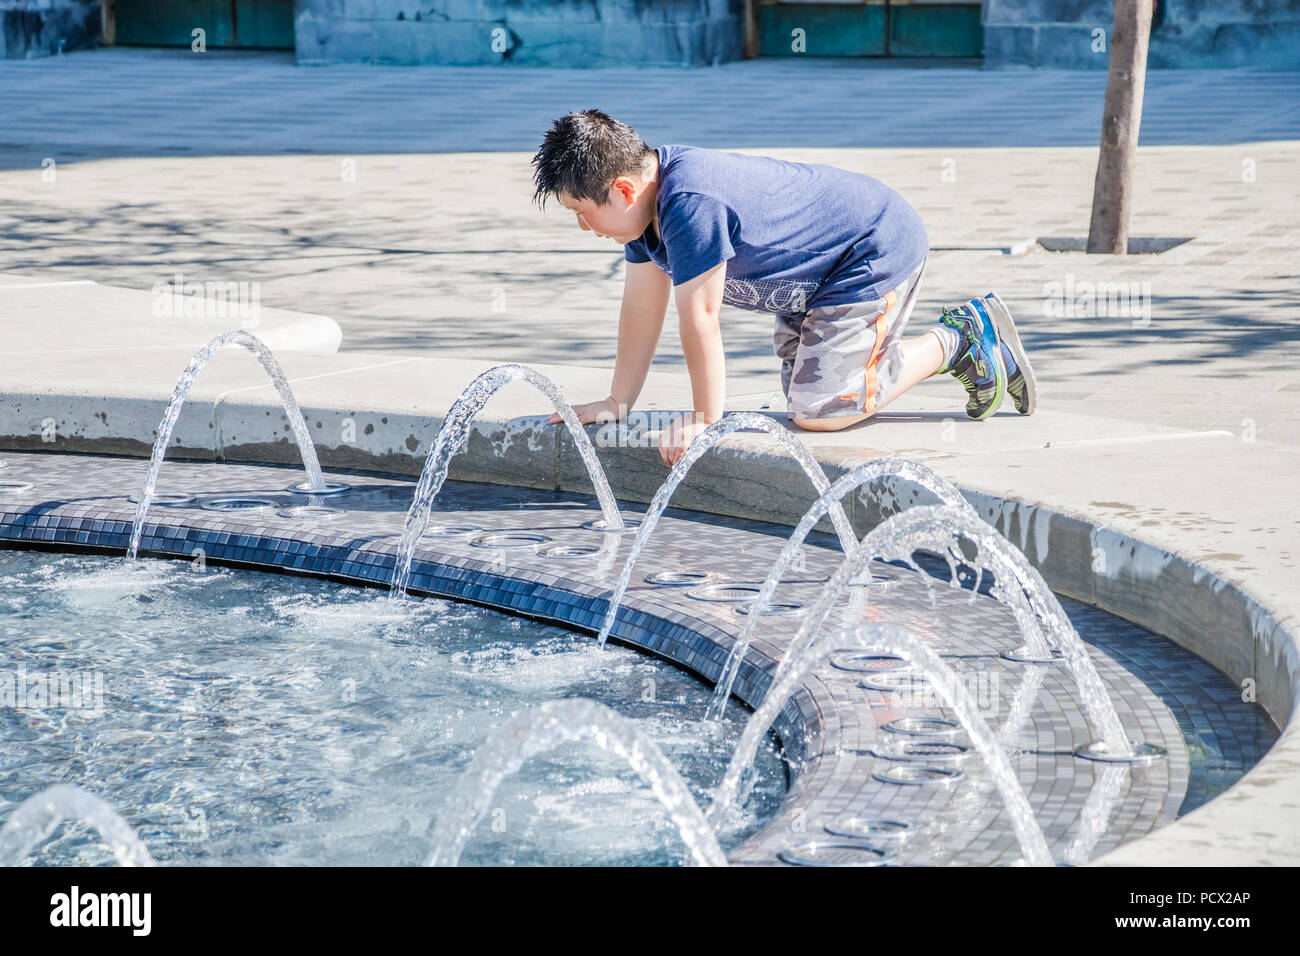 young boy trying to cool off in front of water fountain Stock Photo